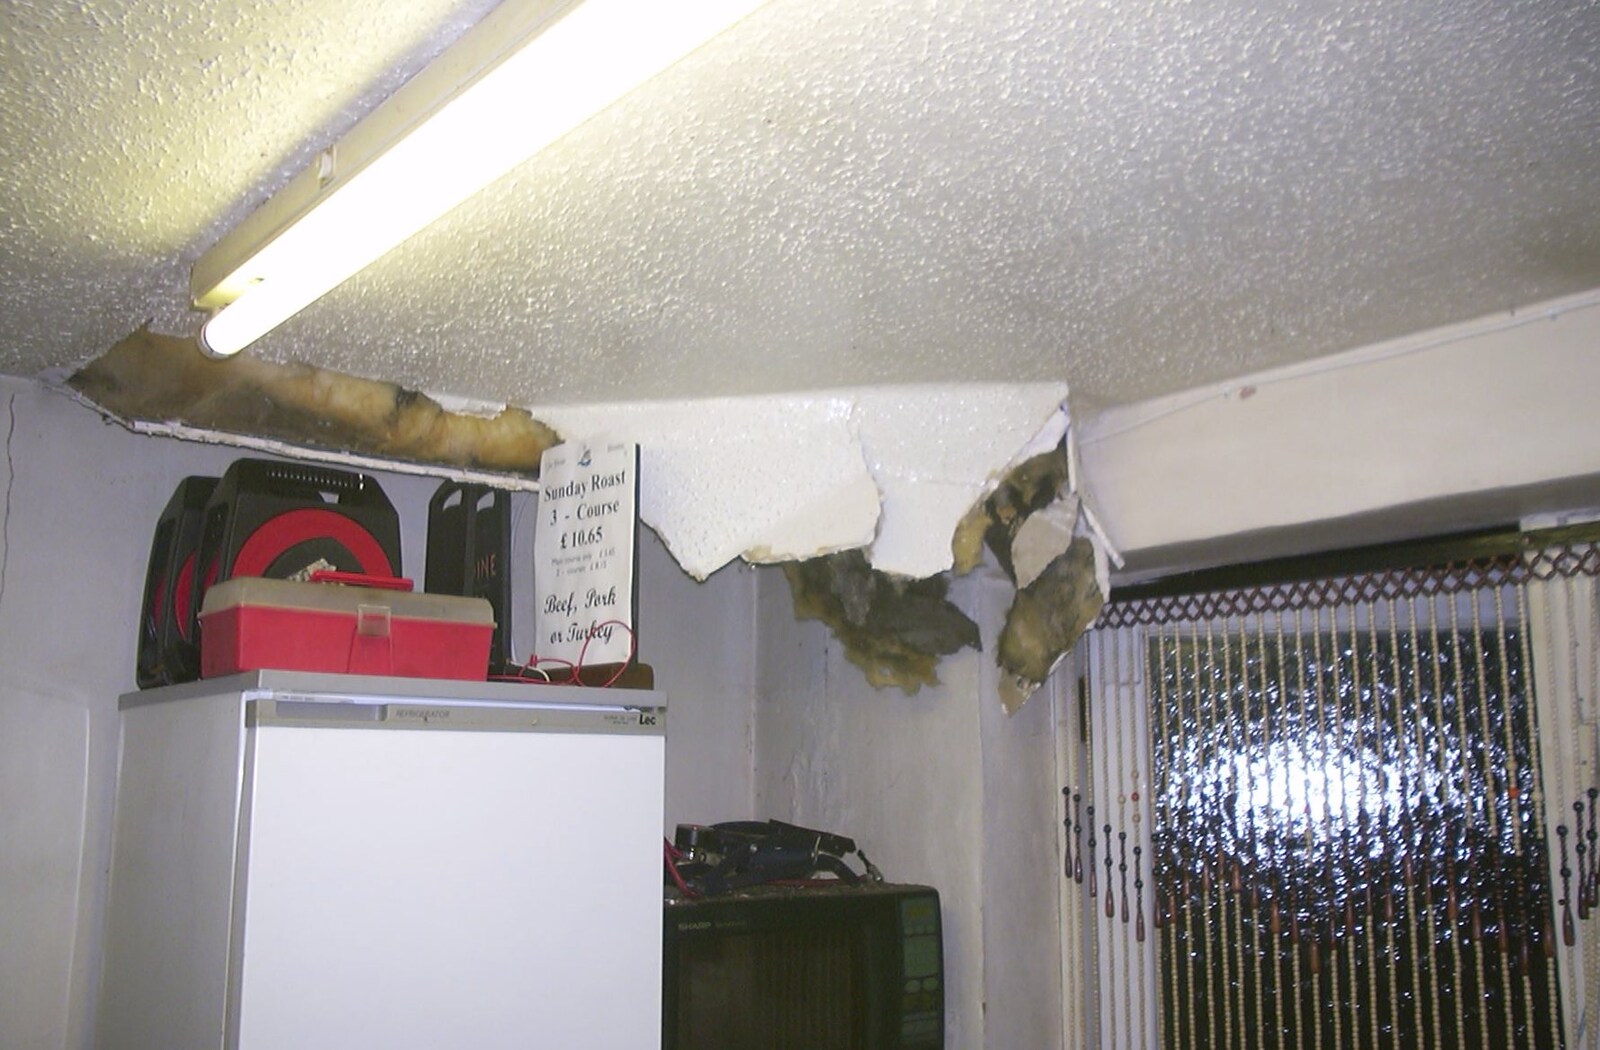 Alan's got a big hole in the kitchen  ceiling from V Festival 2003, Hyland's Park, Chelmsford, Essex - 16th August 2003